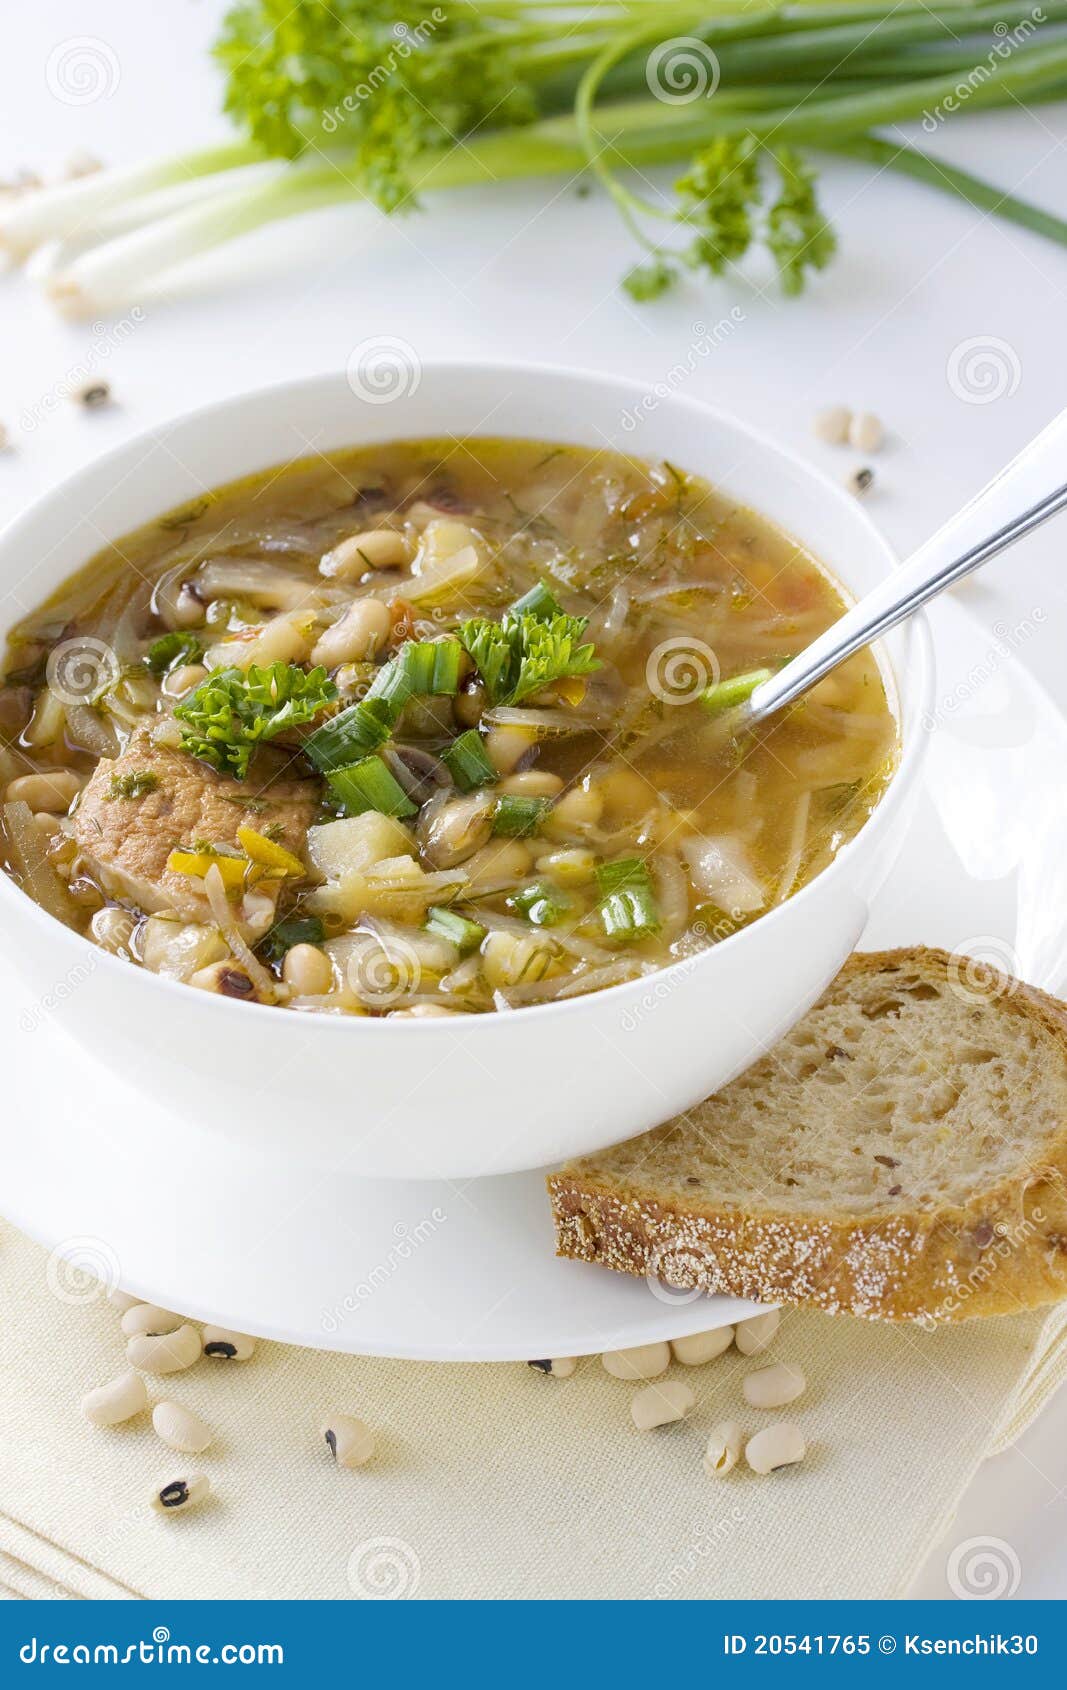 Vegetable Soup in White Bowl Stock Image - Image of carrots, bread ...